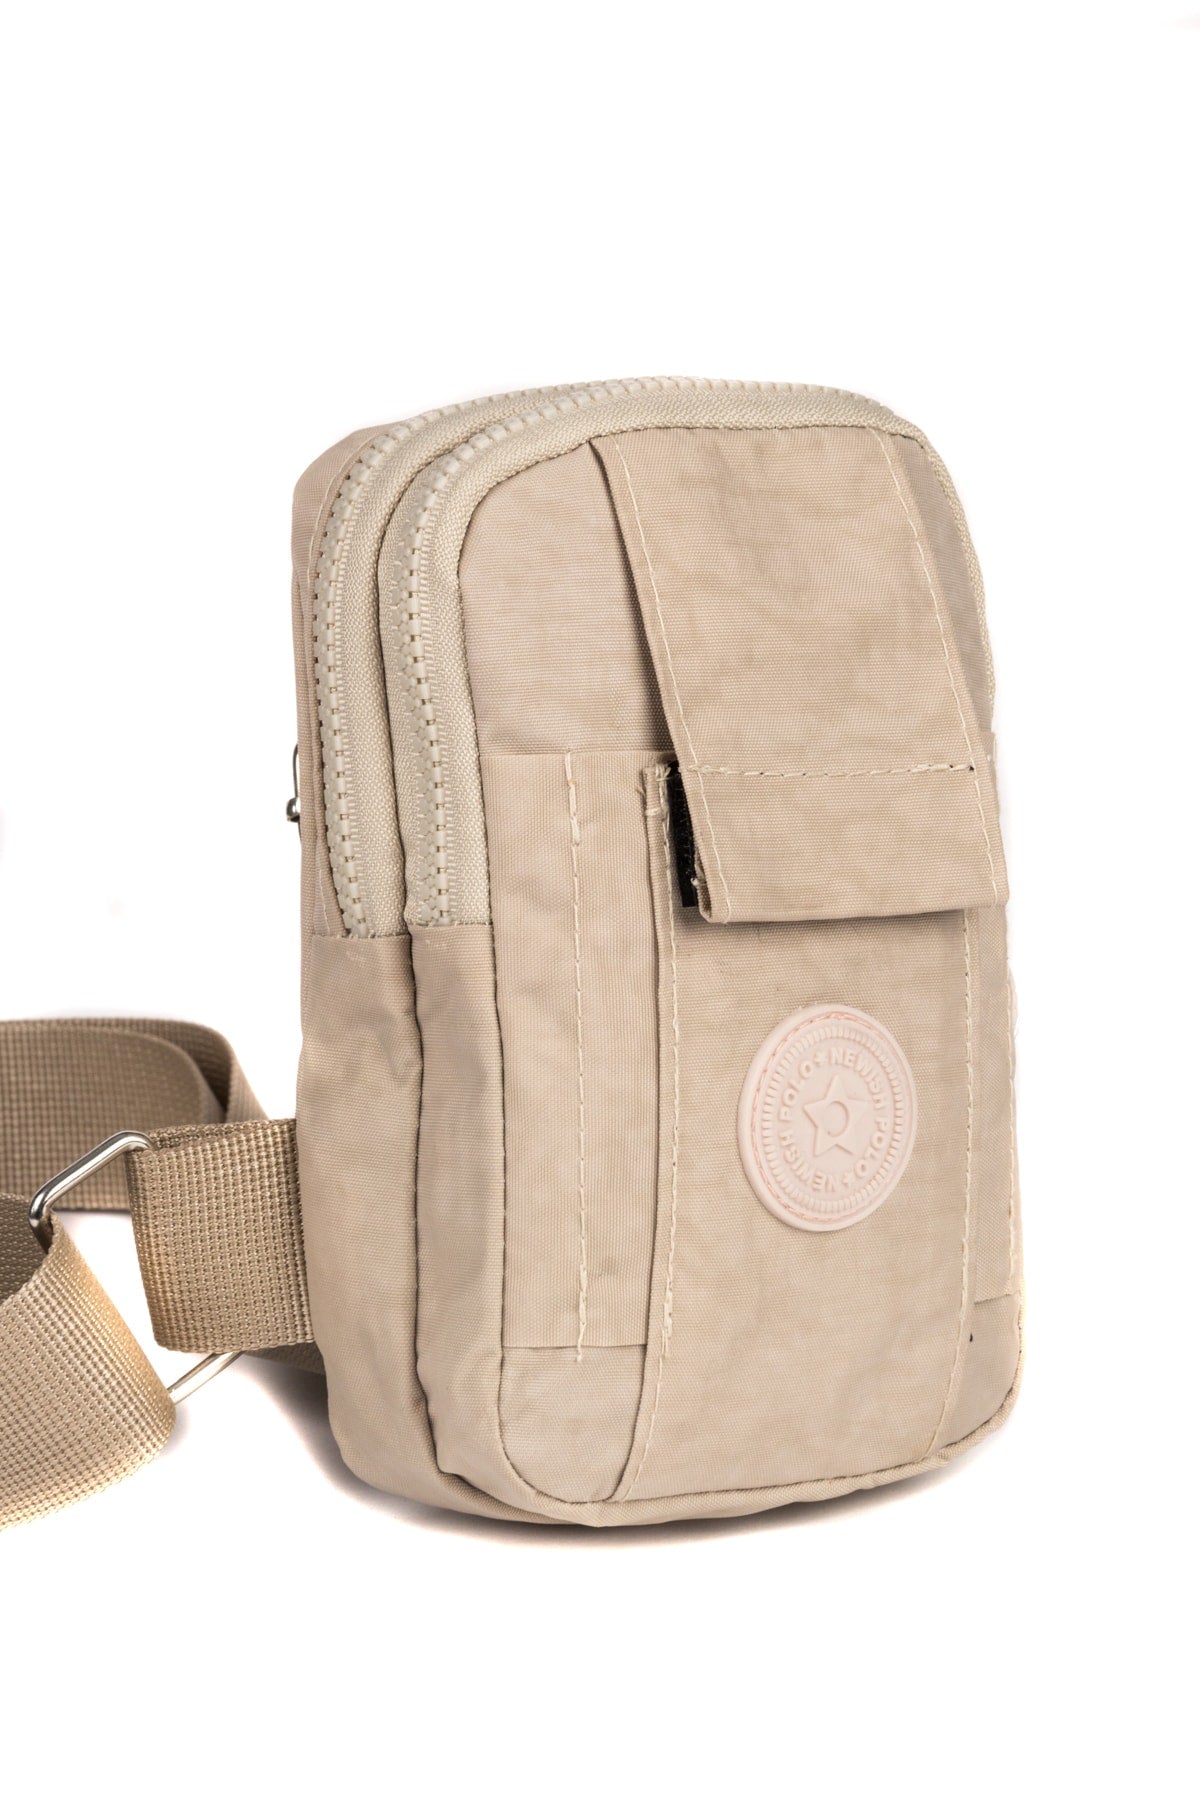 Unisex Crinkled Fabric Mini Shoulder Bag With Phone Compartment Sport And Daily Use Beige